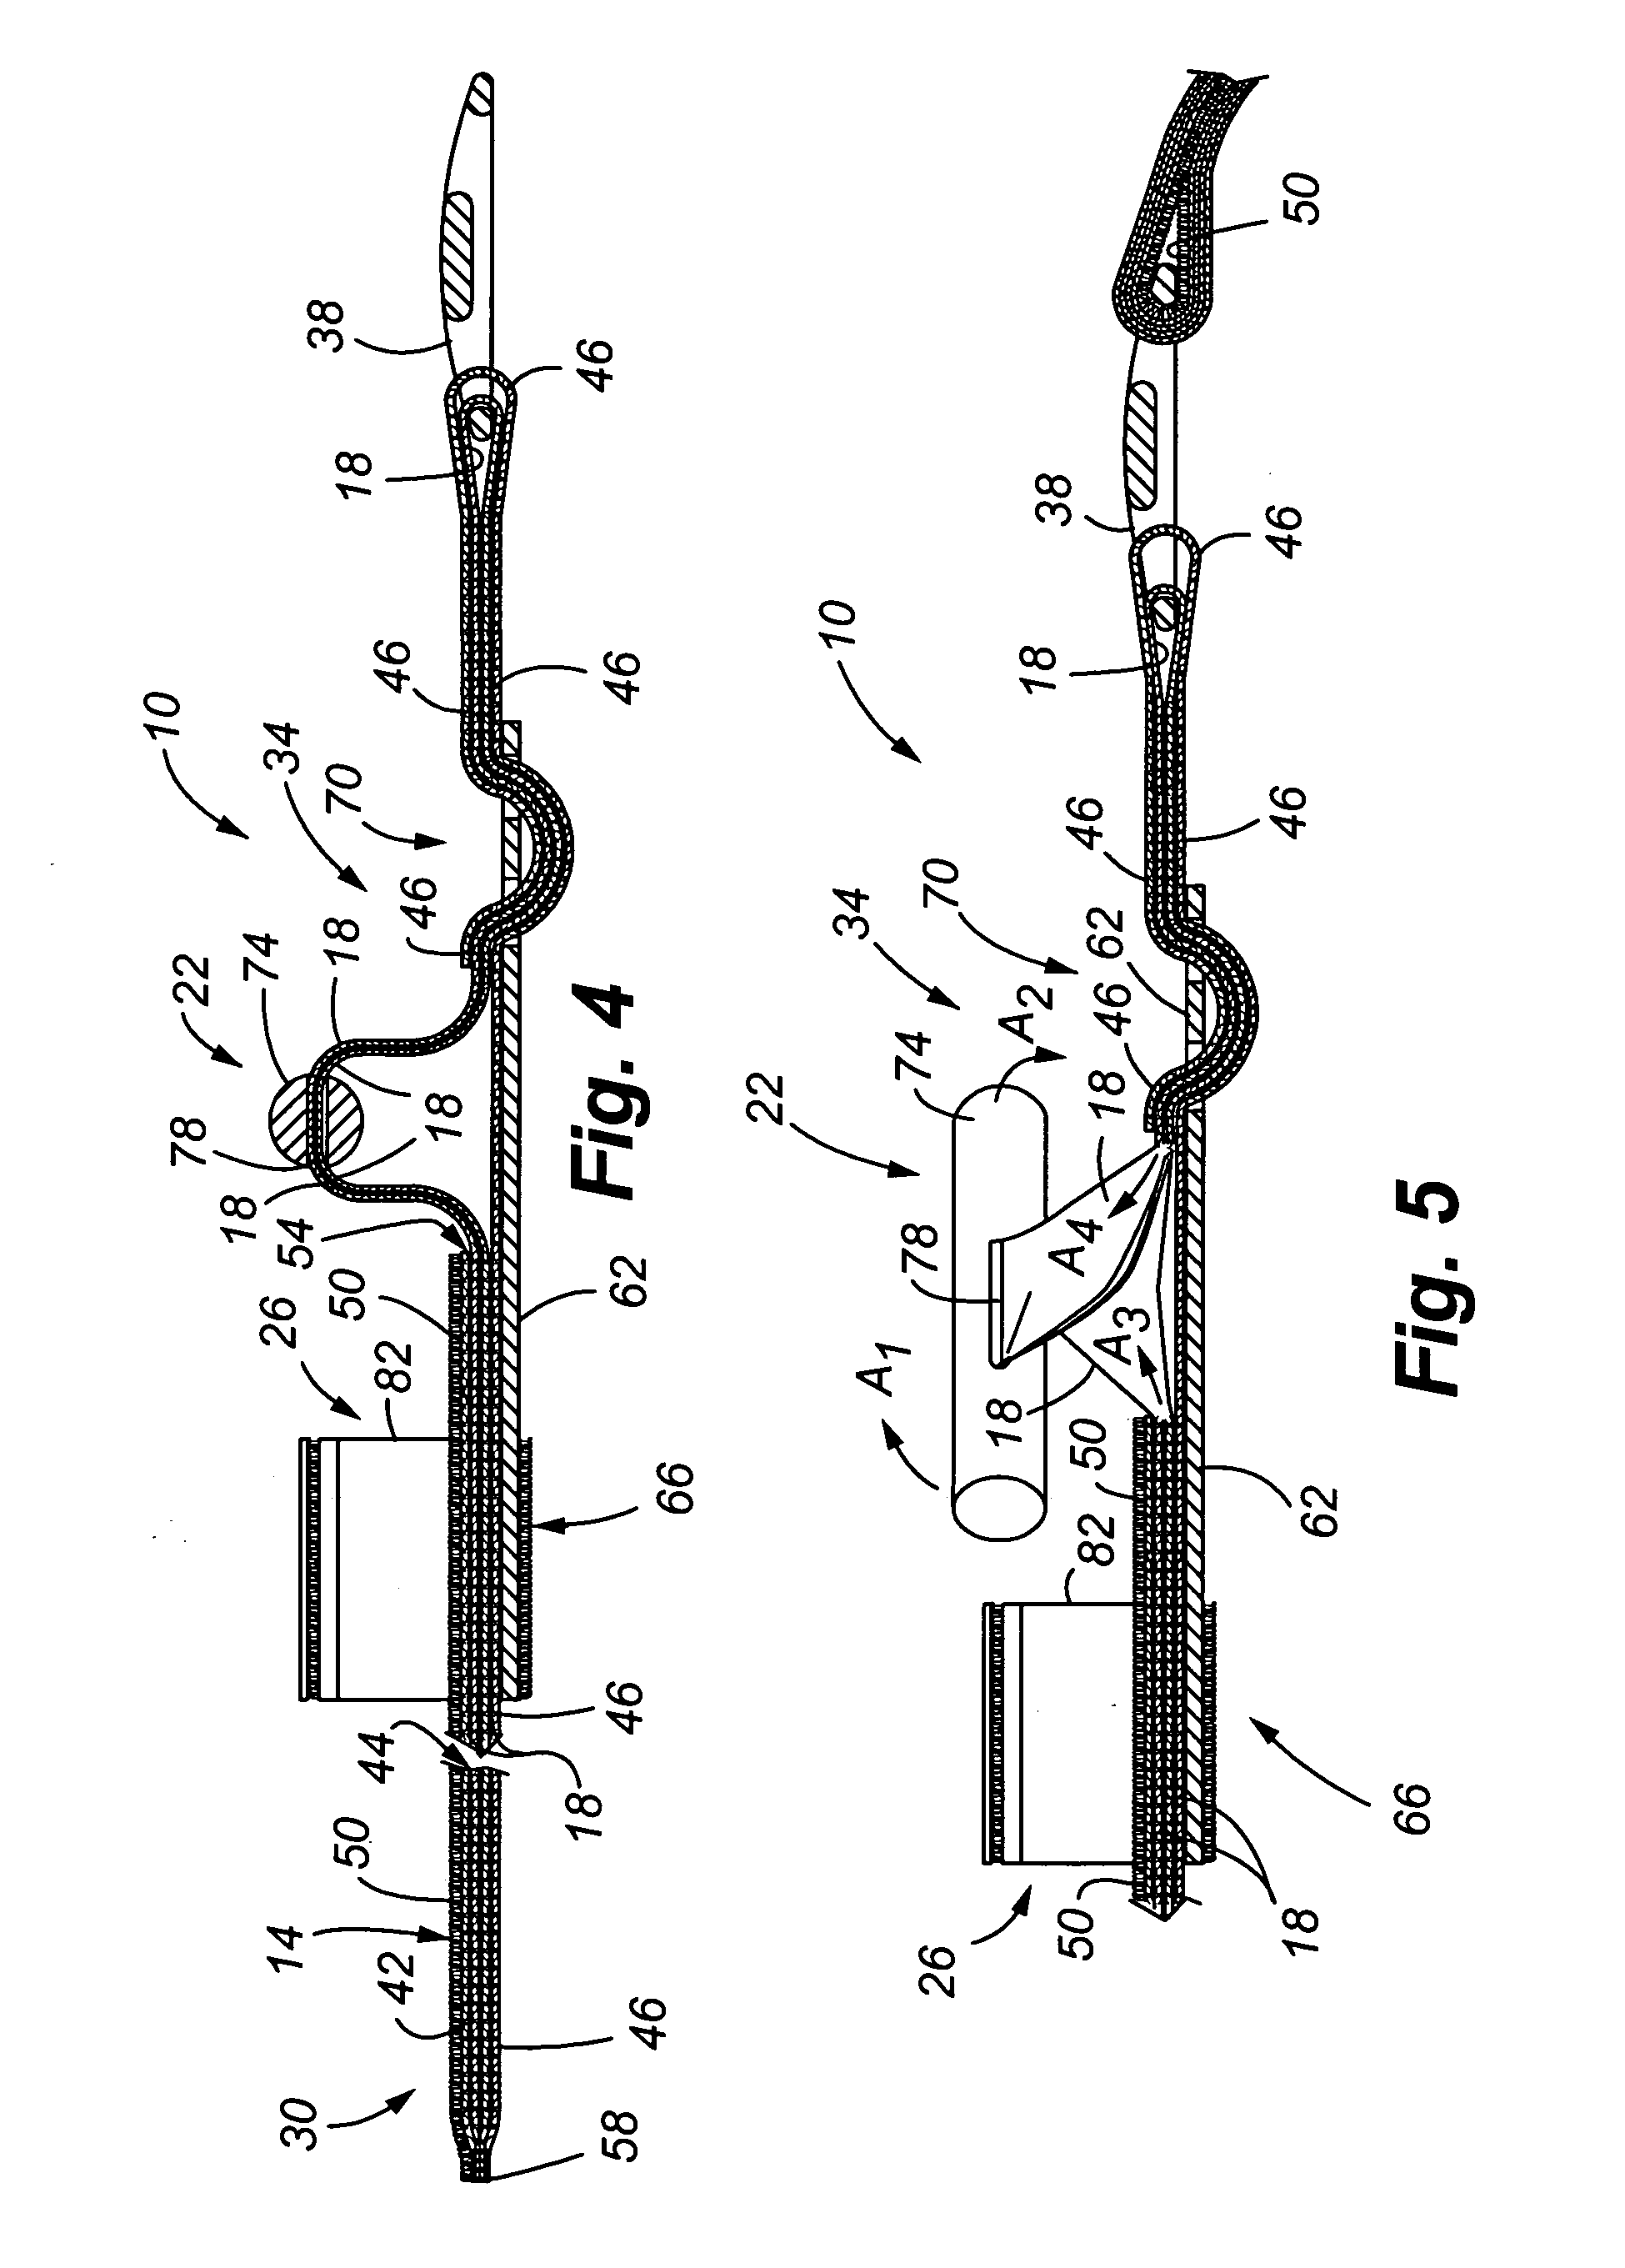 Tourniquet and method of use